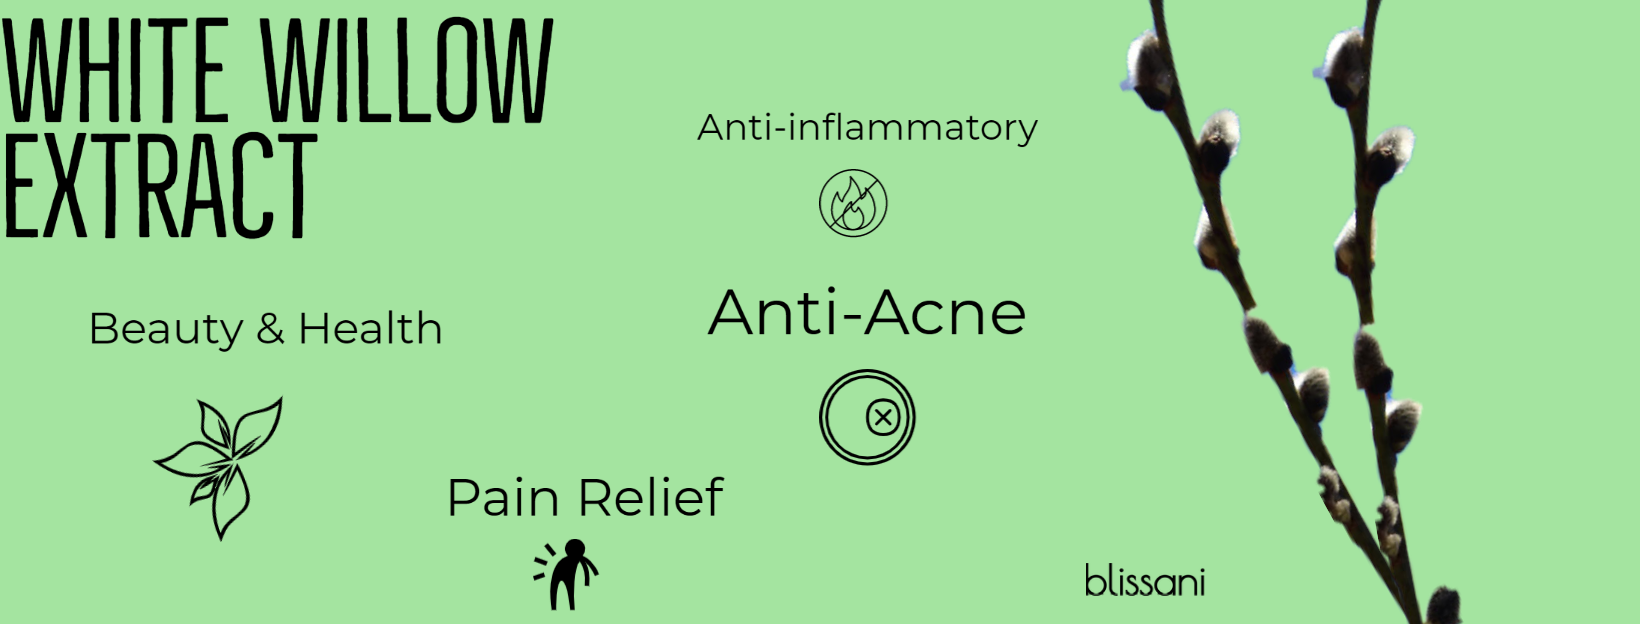 White Willow extract benefits infographic anti-acne and anti-inflammatory links to white willow extract vs acne blog article by blissani naturals